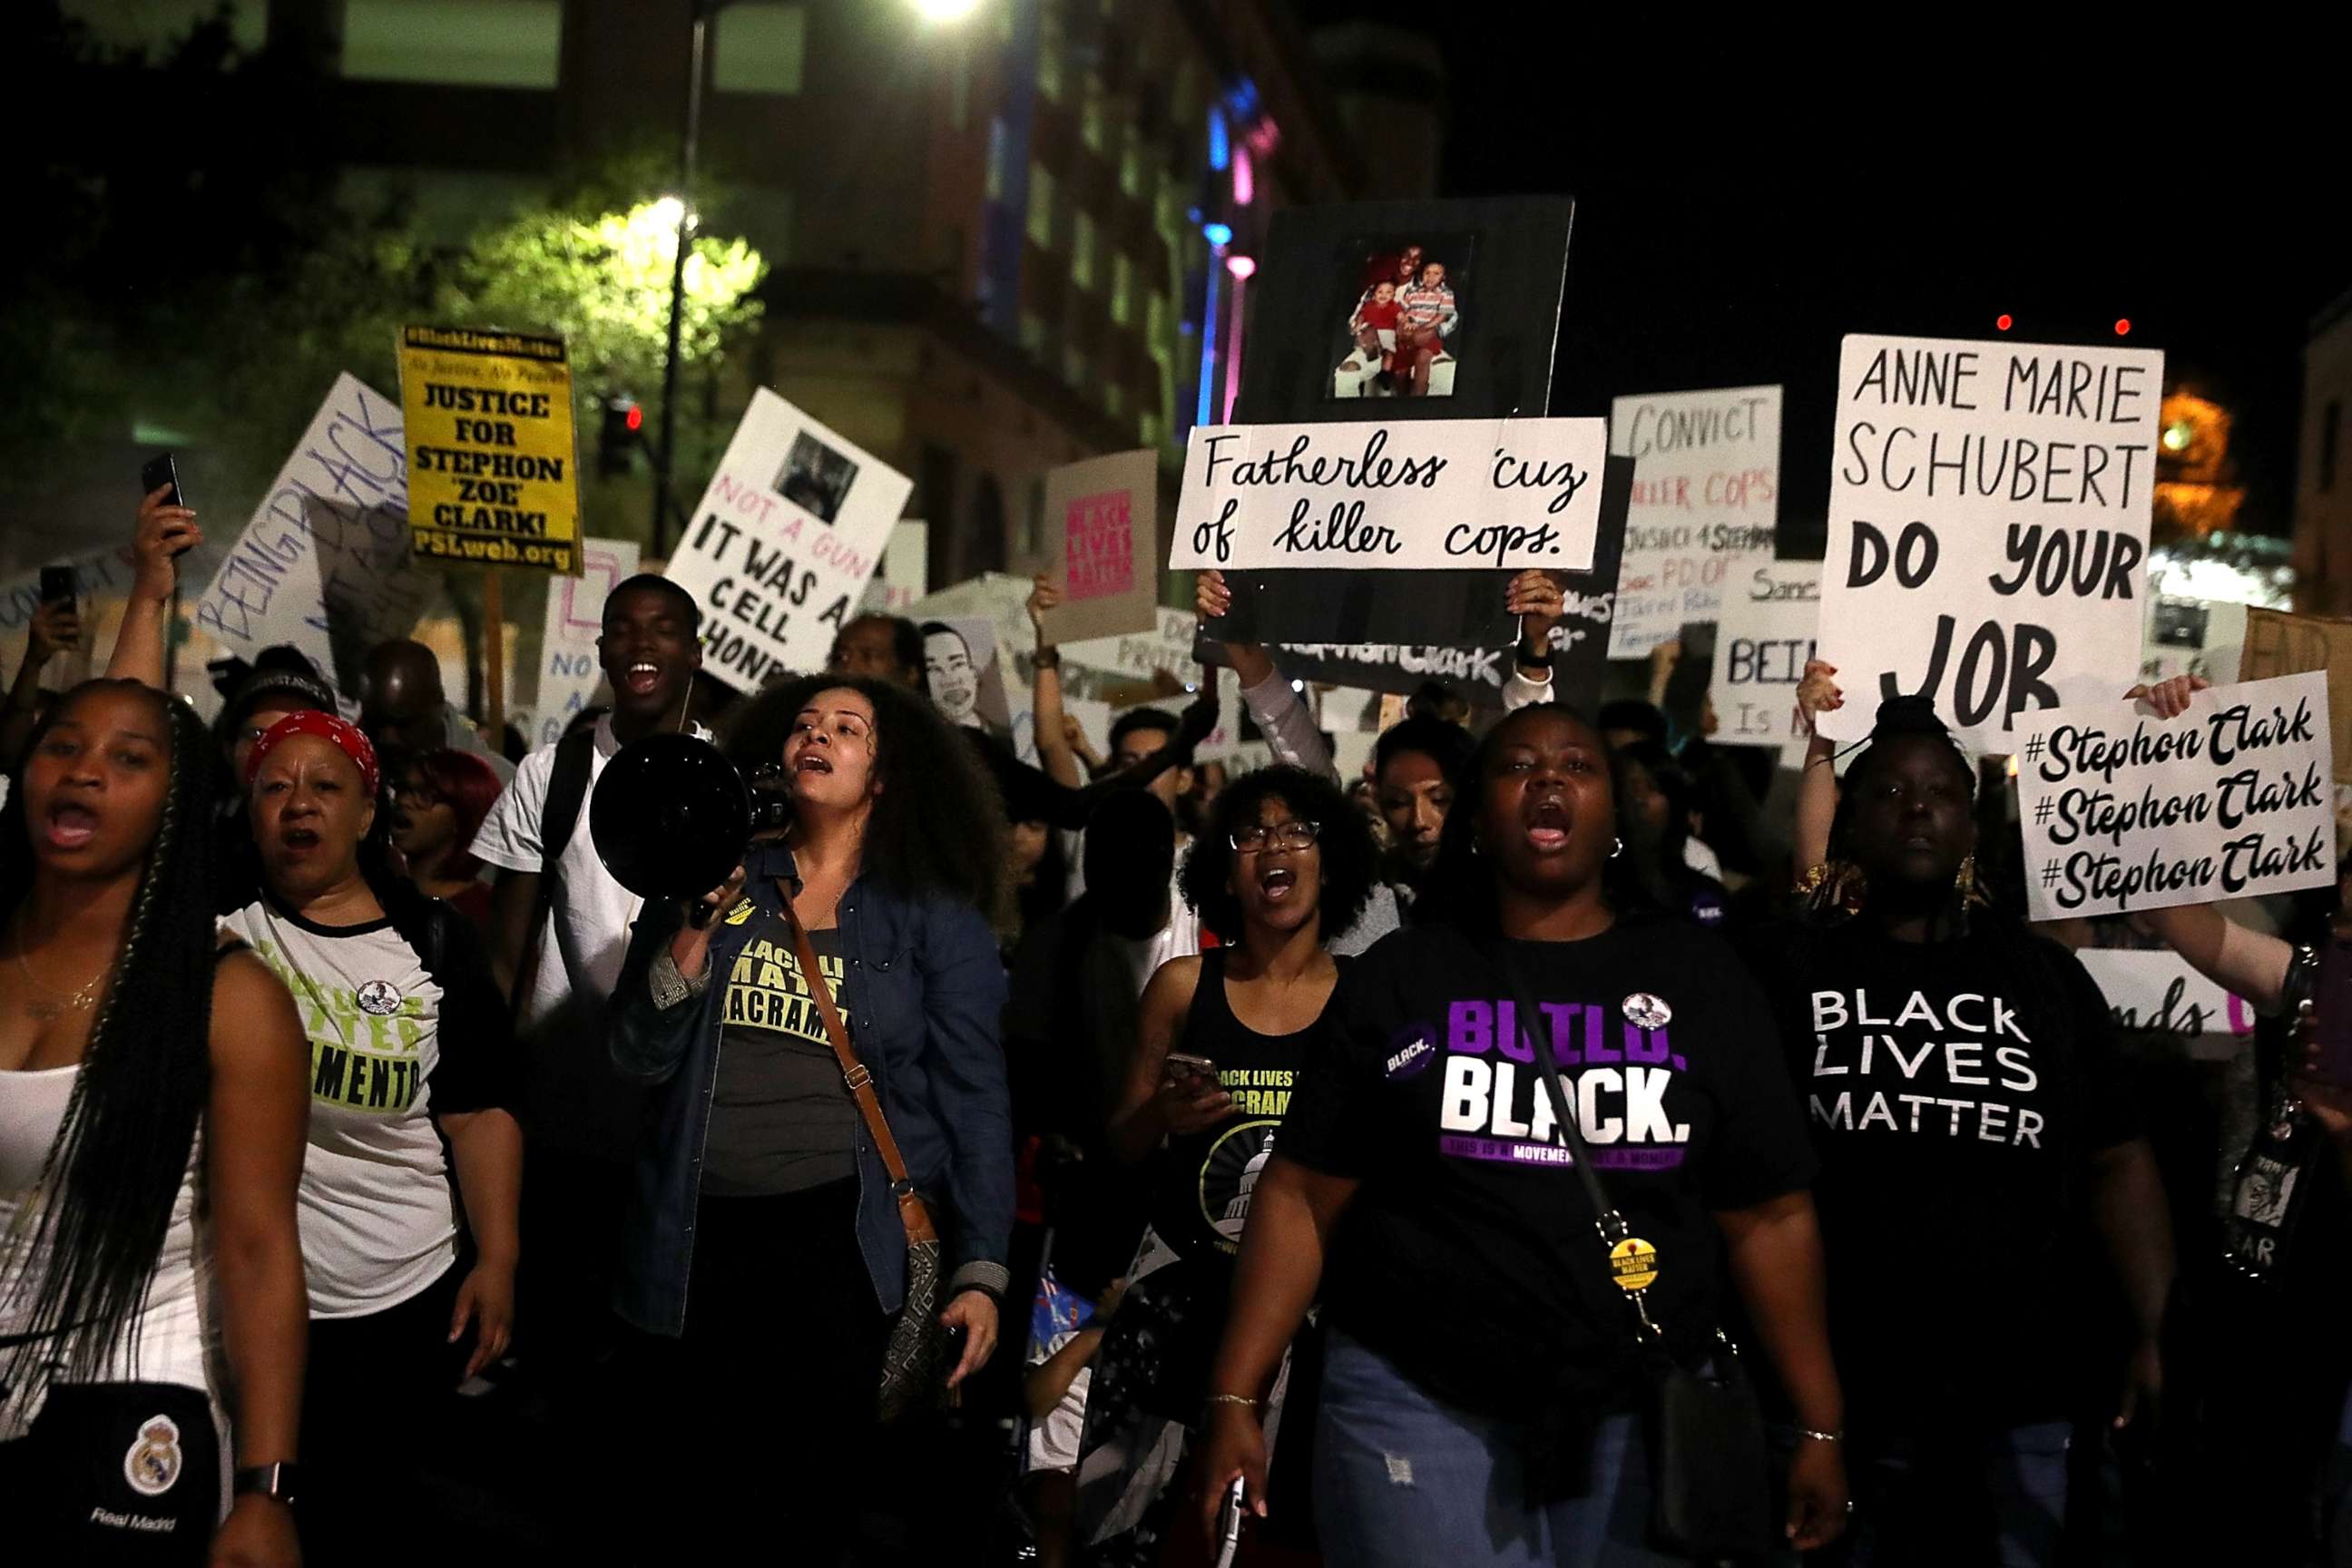 PHOTO: Black Lives Matter protesters march through the streets of Sacramento during a demonstration, March 30, 2018 in Sacramento, Calif., demanding justice for Stephon Clark, who was shot and killed by Sacramento police on March 18.